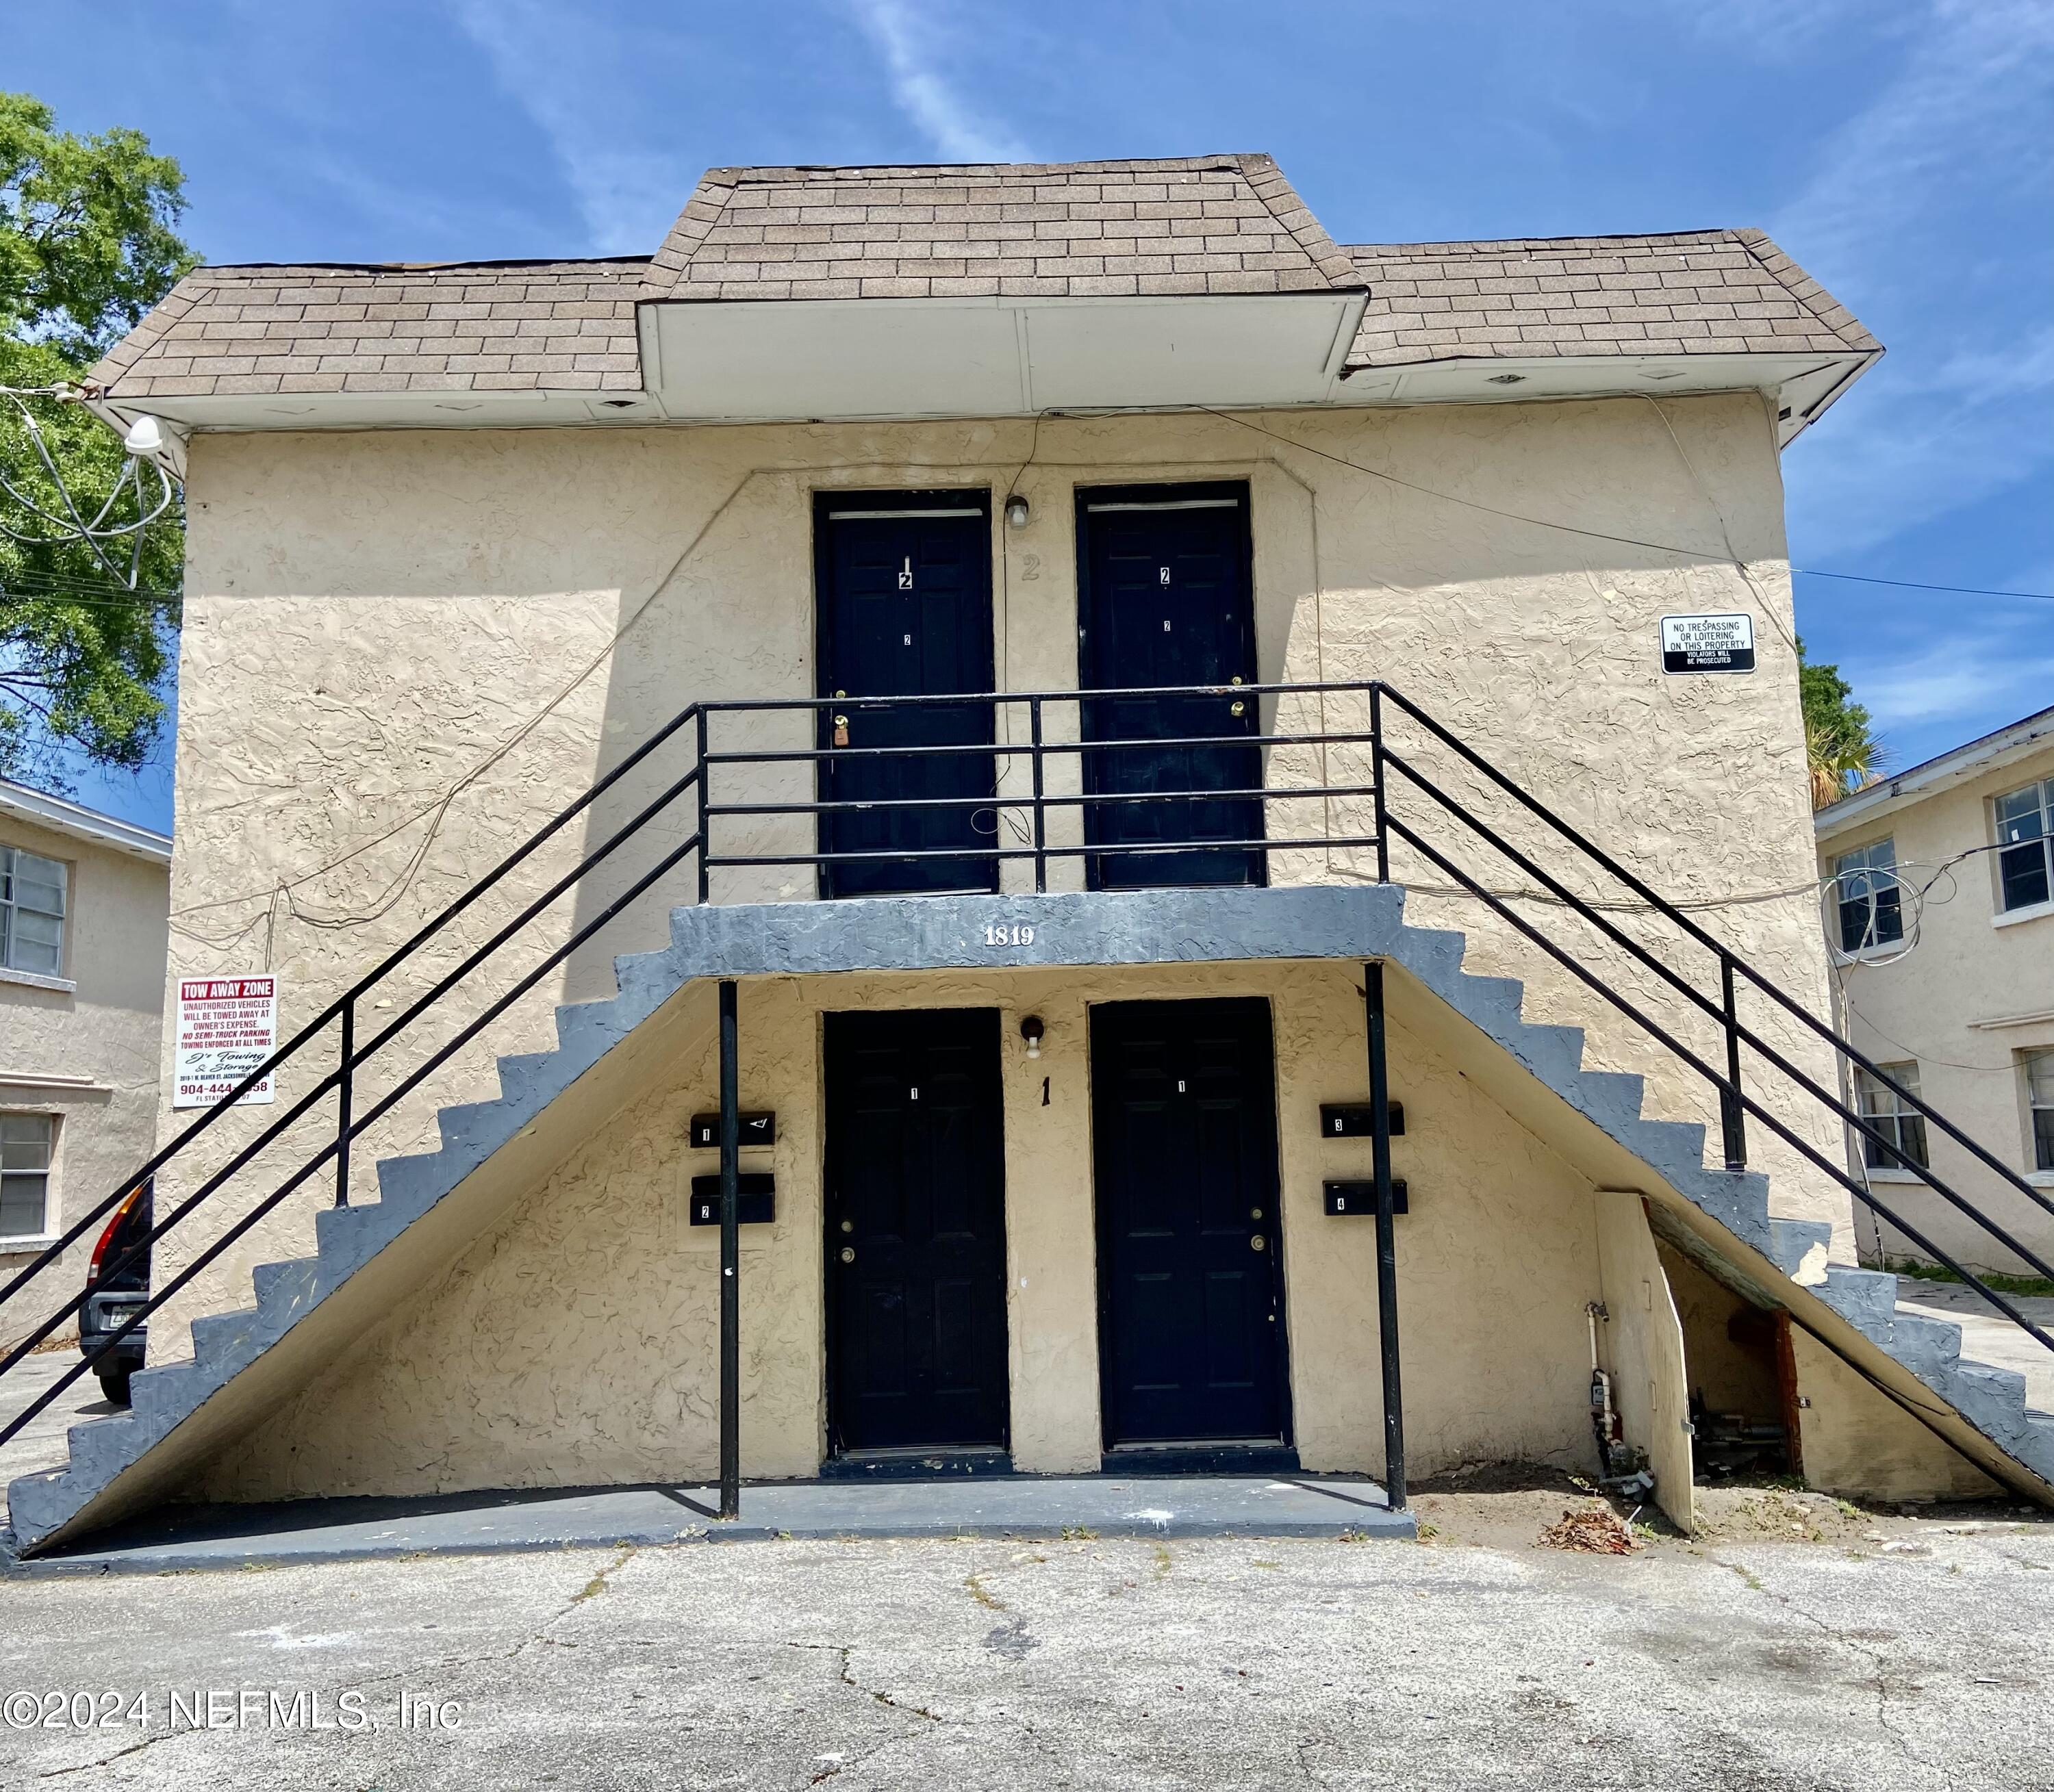 Jacksonville, FL home for sale located at 1819 W 6th Street Unit 2, Jacksonville, FL 32209